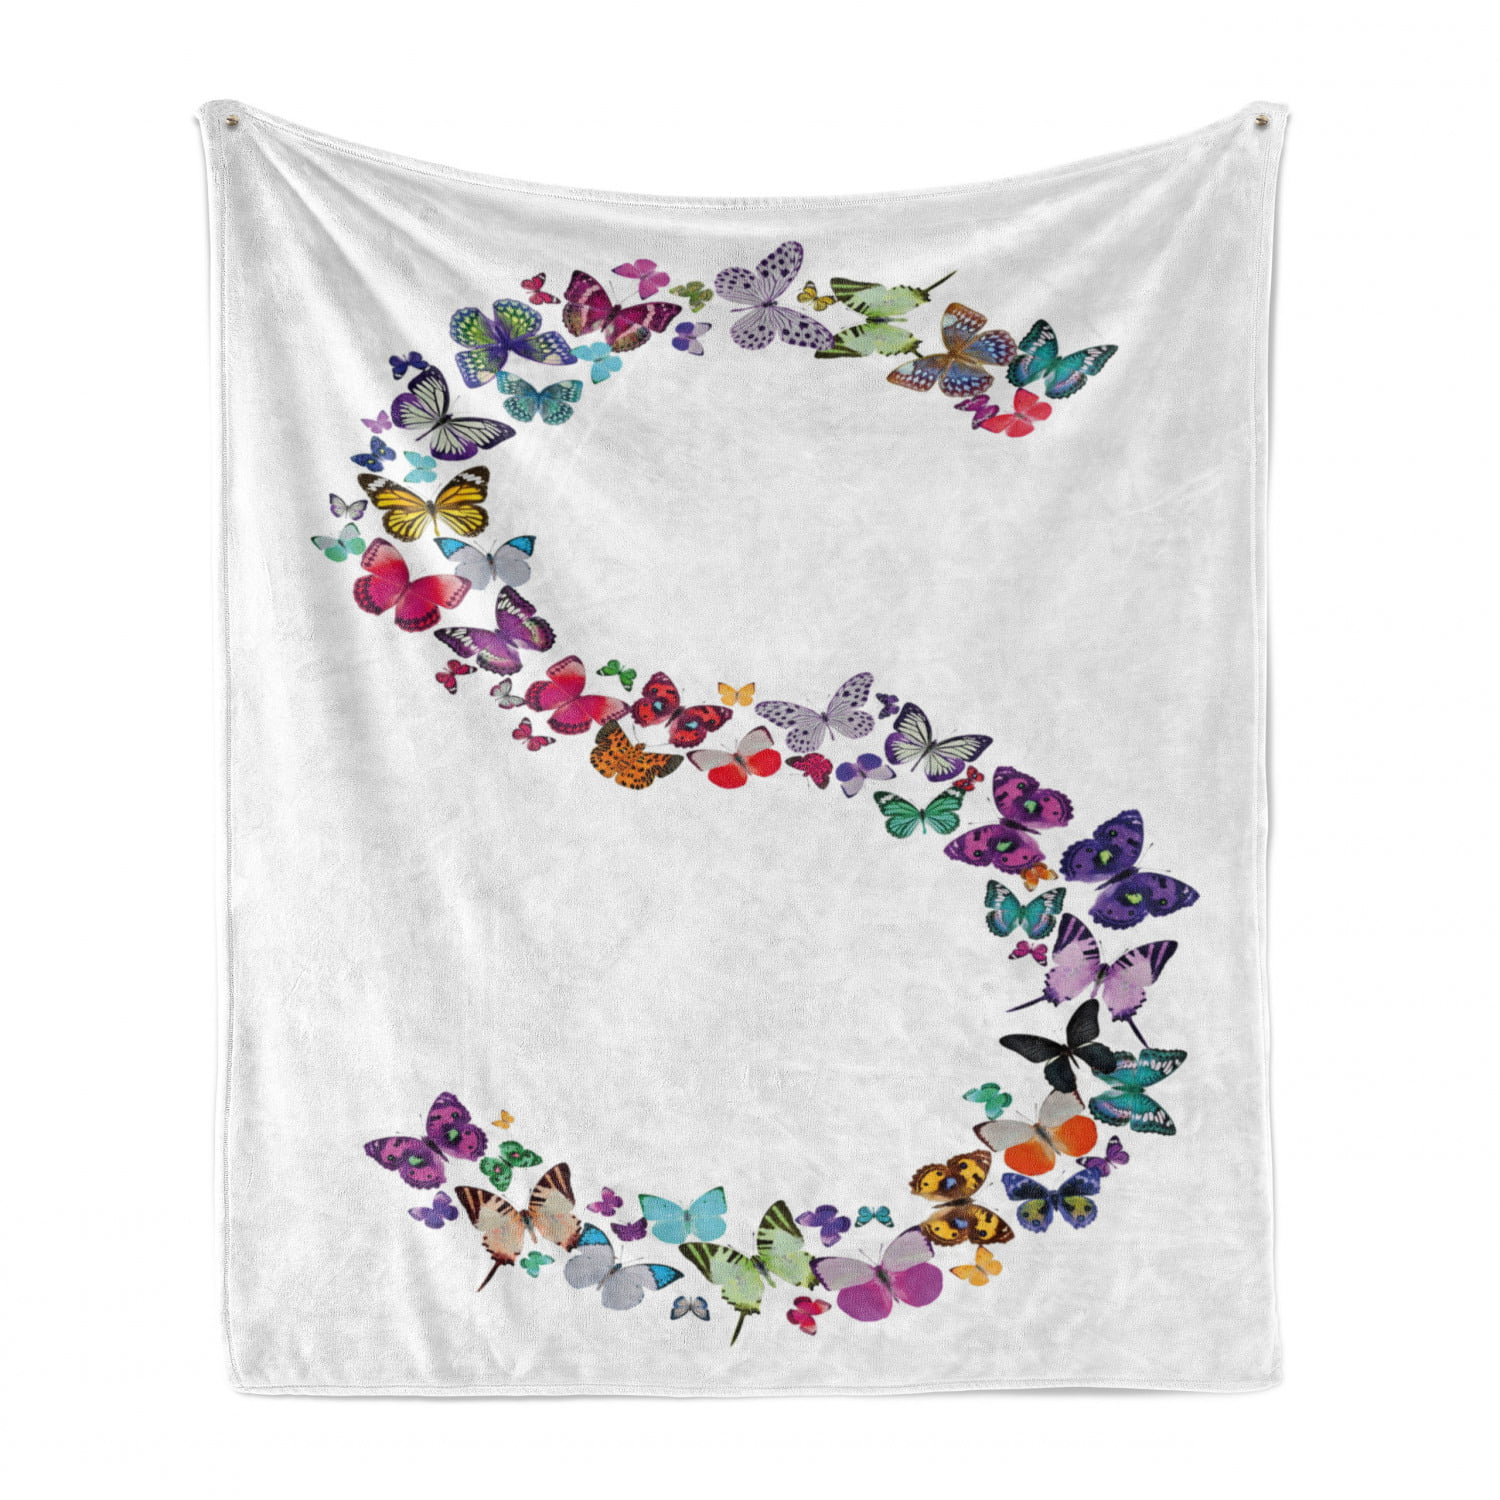 Ambesonne Butterfly Soft Flannel Fleece Throw Blanket Cozy Plush for Indoor and Outdoor Use Multicolor Spring Season Themed Blooming Nature Inspired Flora and Fauna Pattern Swirls 50 x 60 